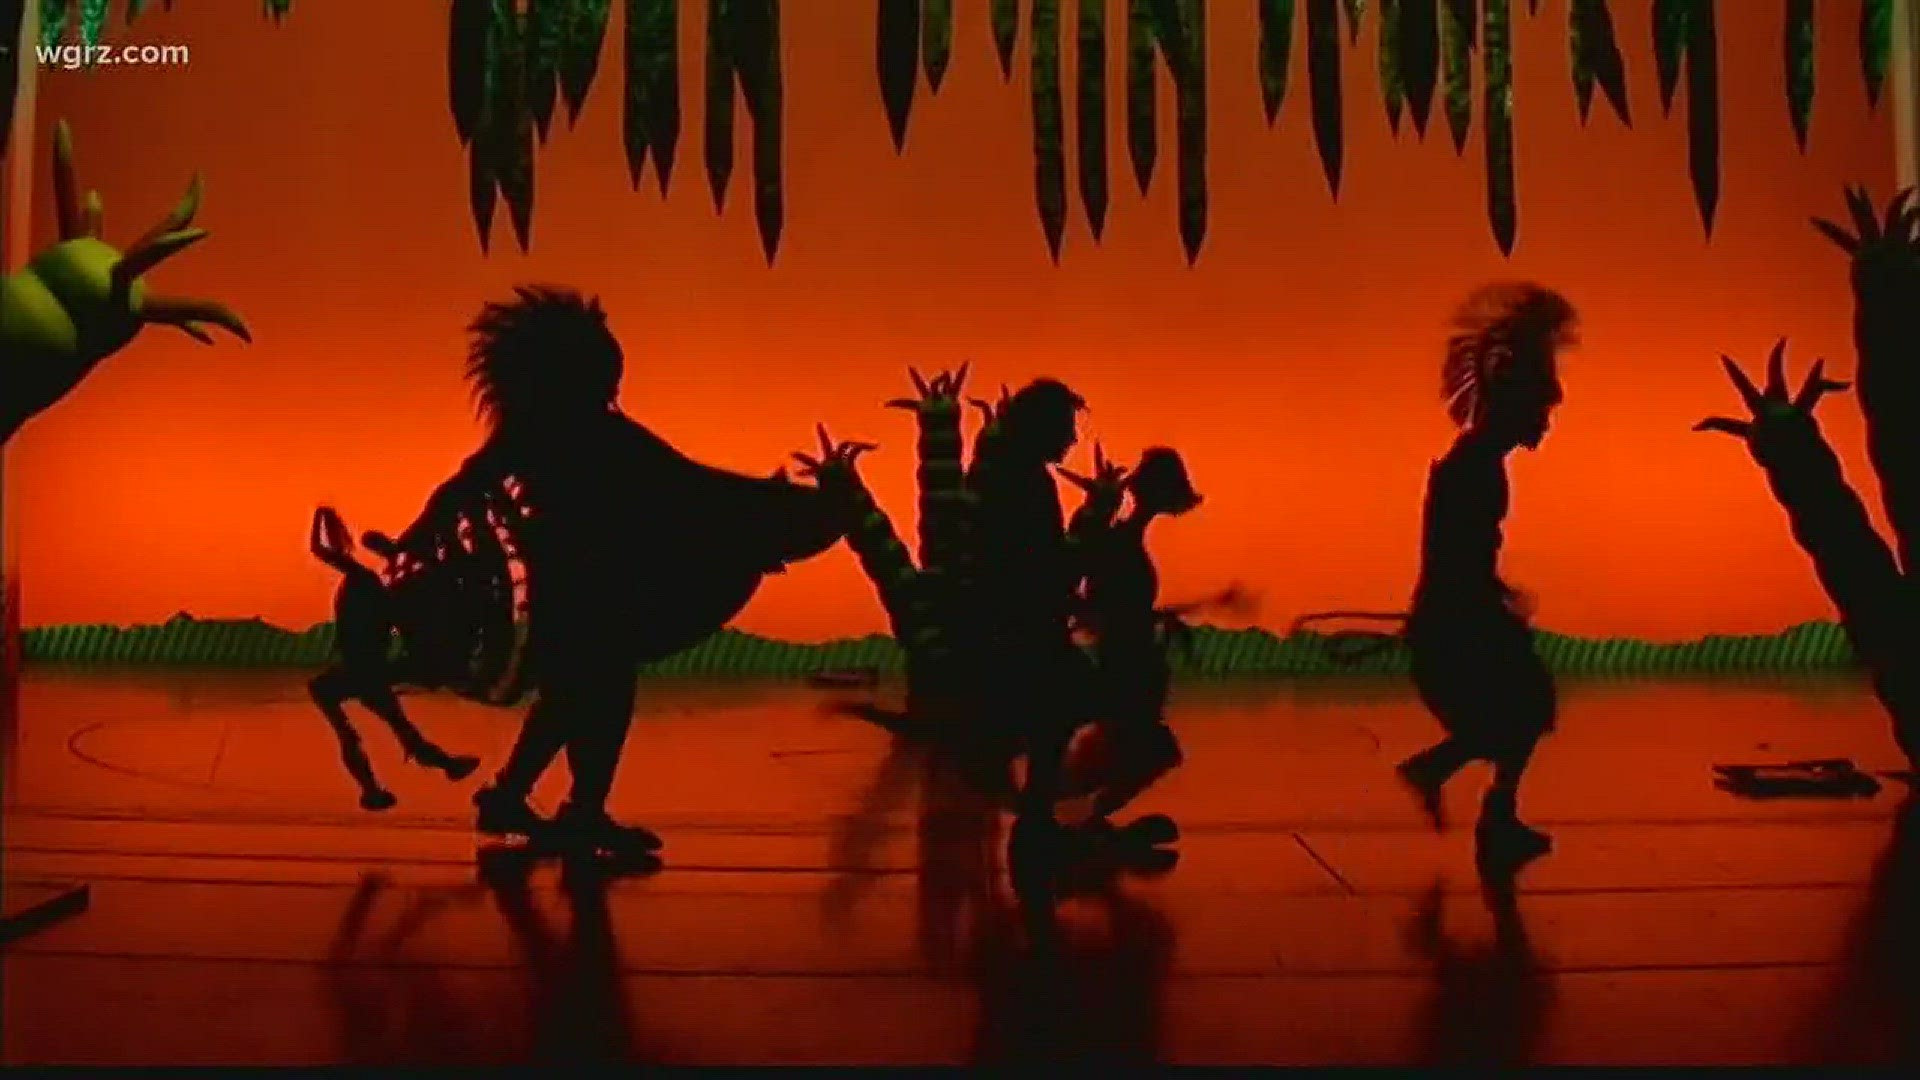 If you are hoping to catch the Lion King at Shea's...you have until this Sunday before the traveling show moves to its next city. Before it goes though, we wanted to get a backstage look at the making of the musical.